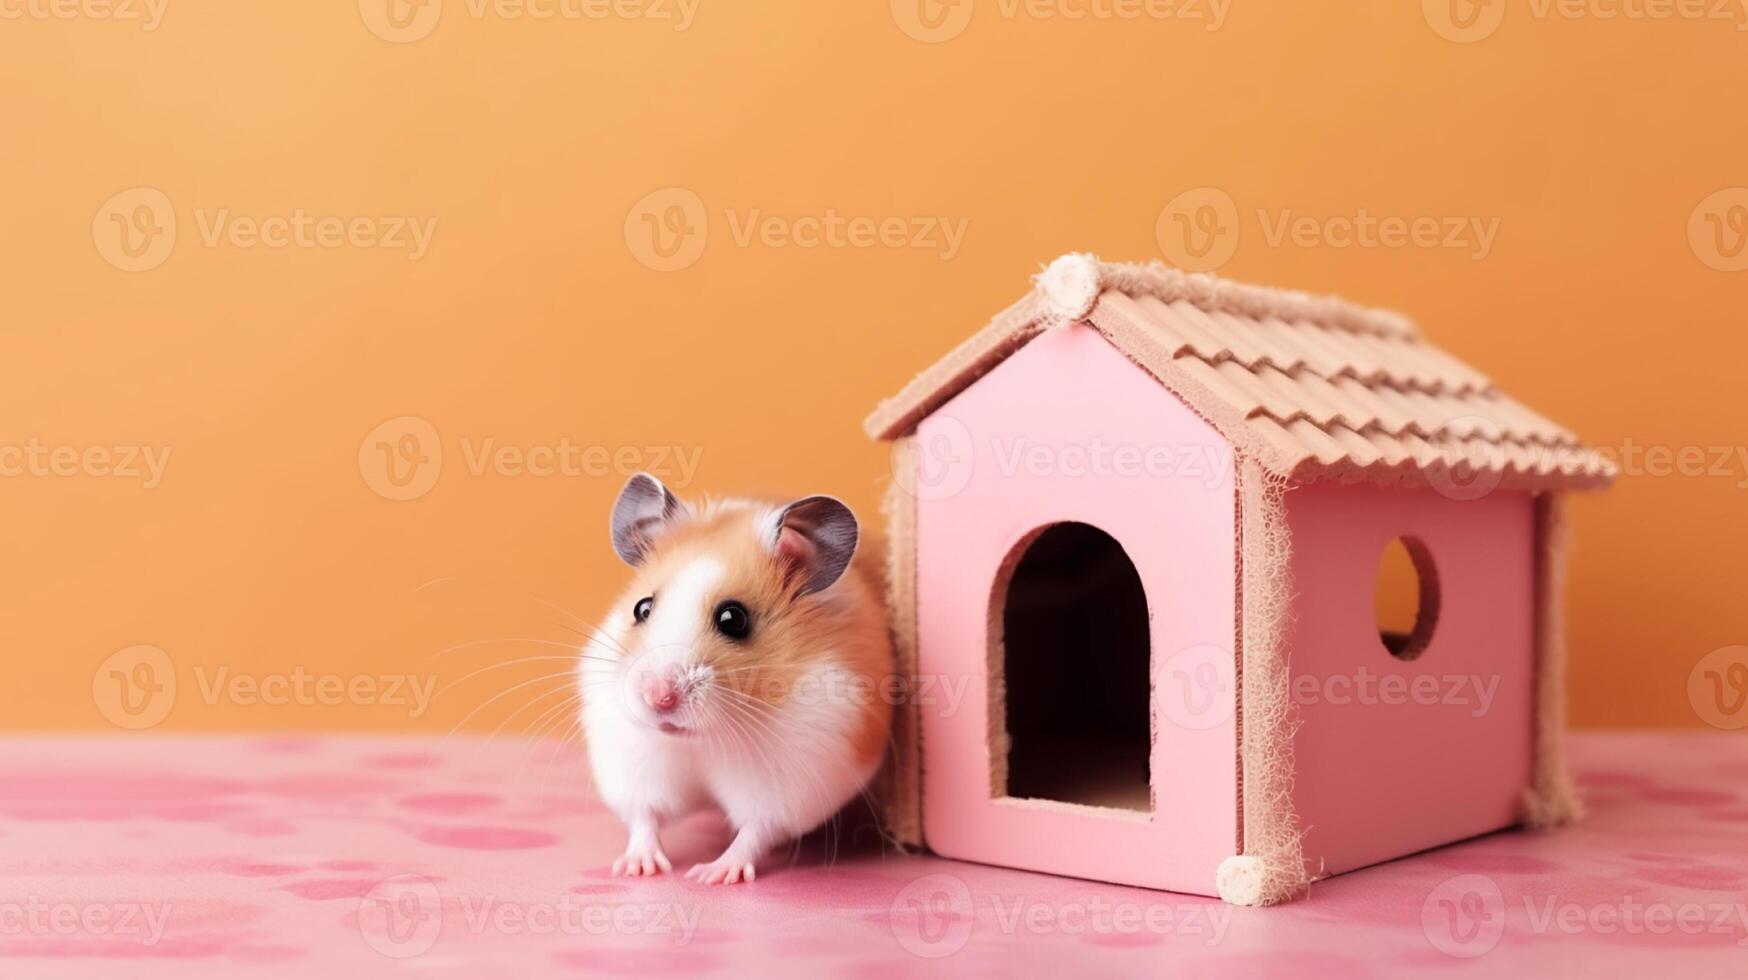 Syrian white ginger hamster on pink orange background in wooden small decorative house for rodents copy space pet love and care photo